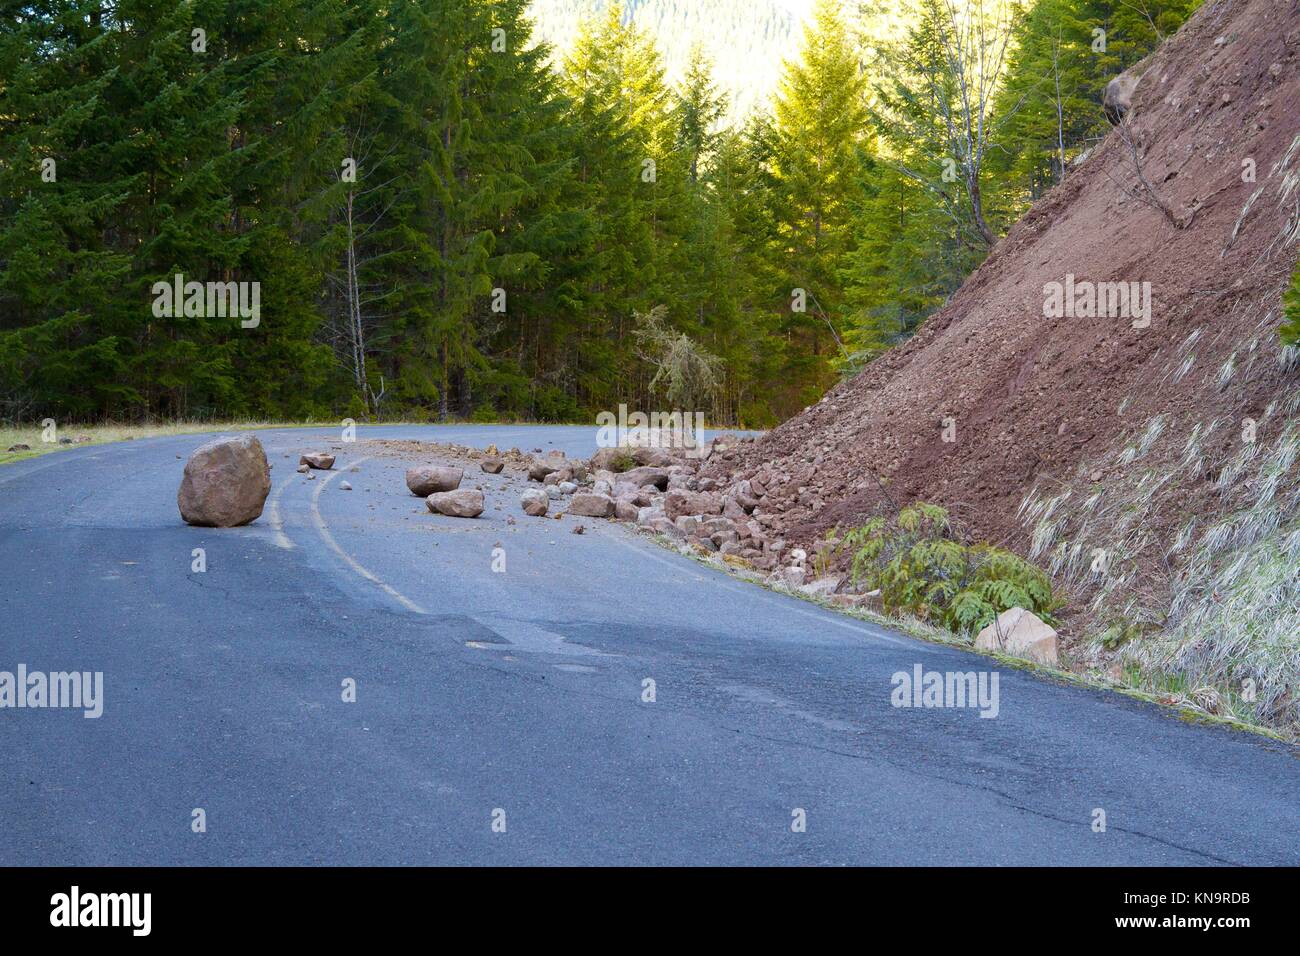 This national forest road is blocked by a land slide of rock and debris to where it is a hazard for drivers in cars. Stock Photo